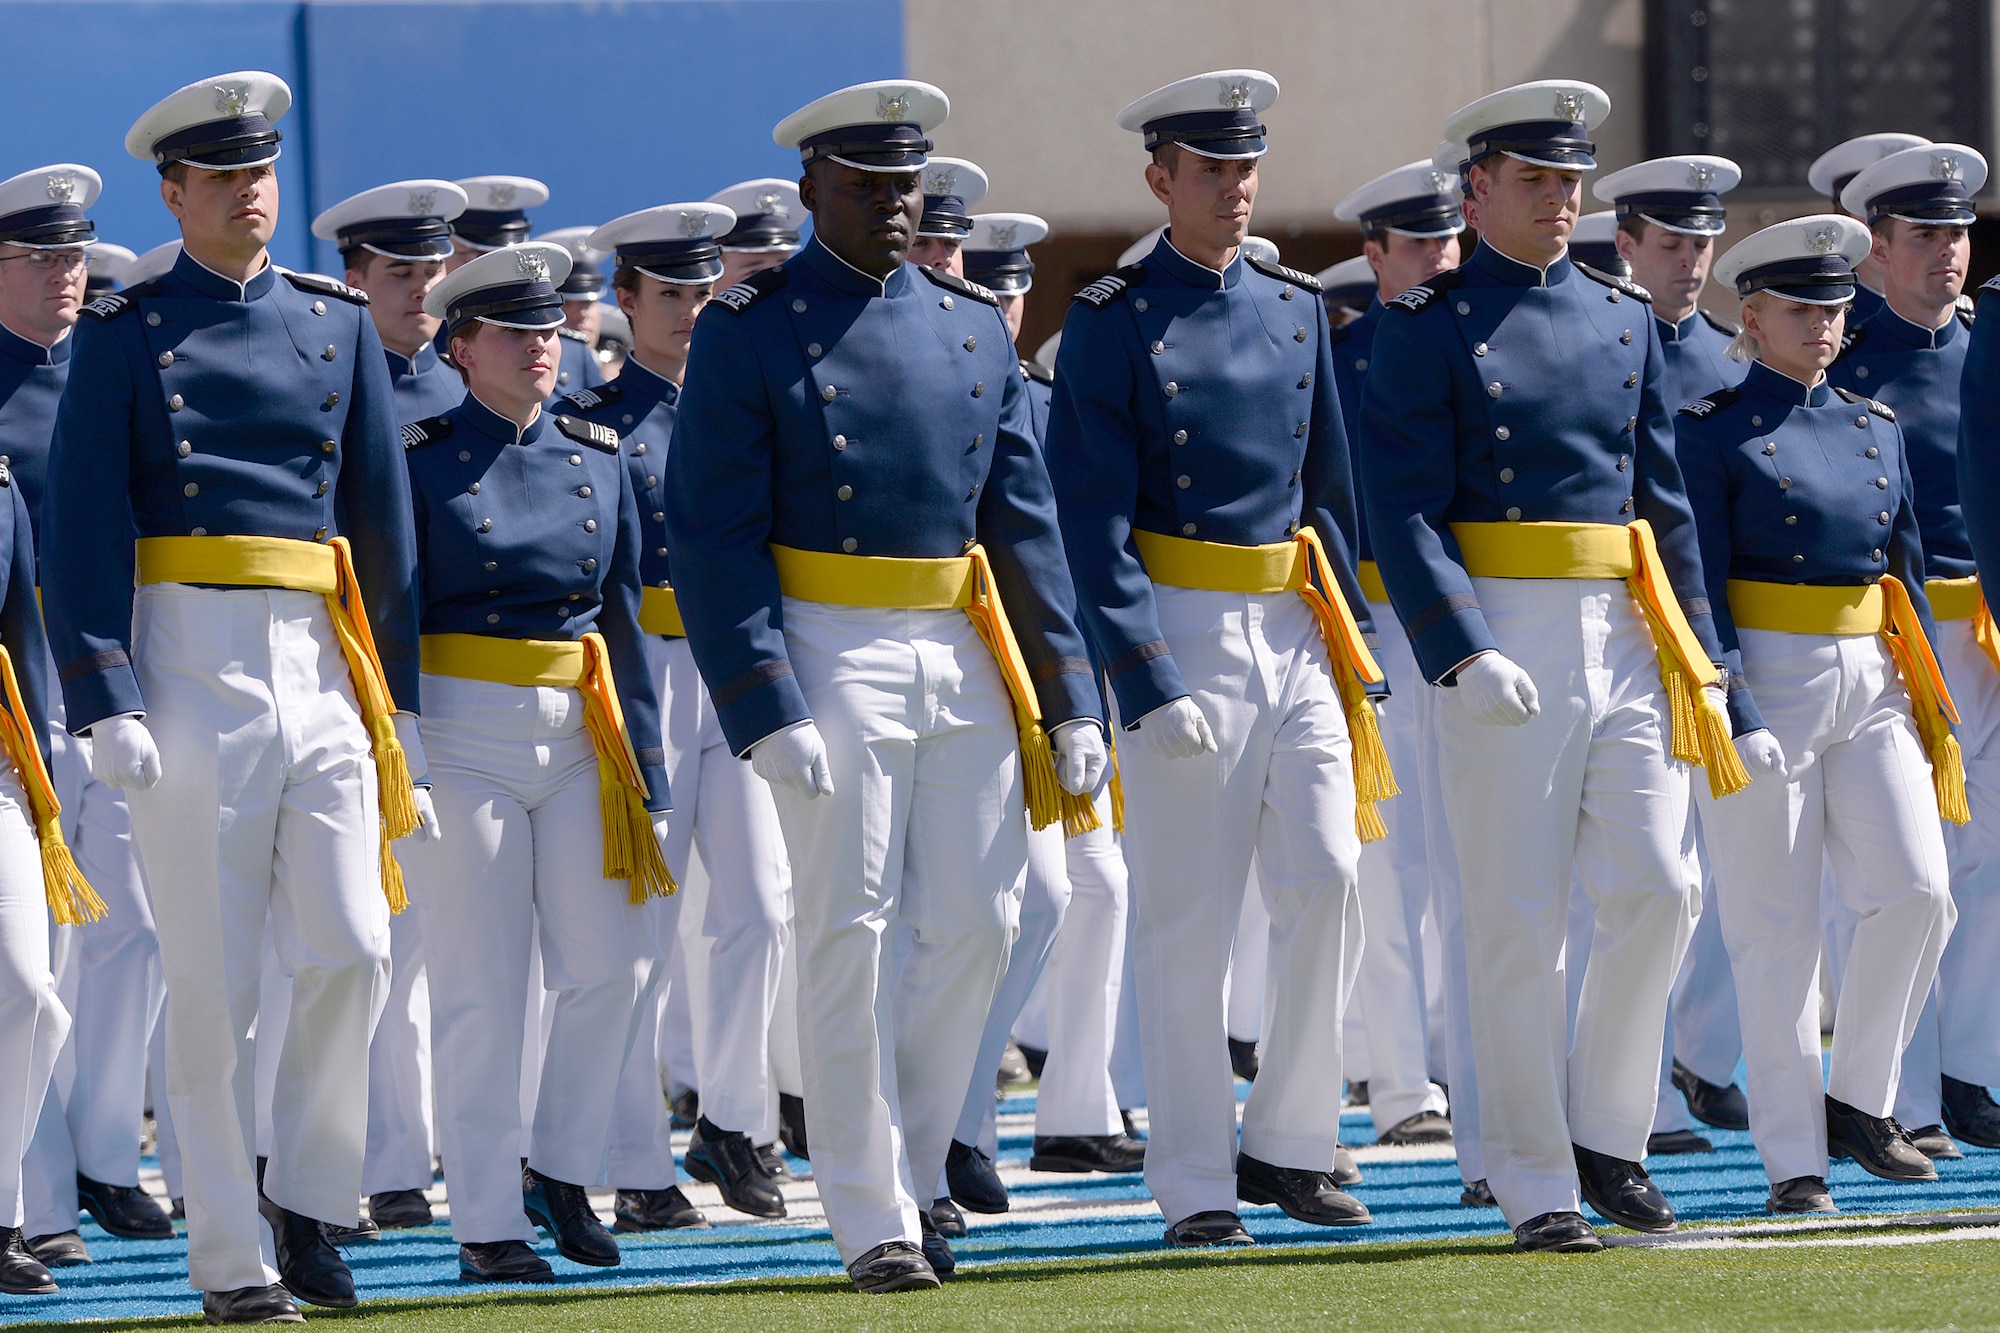 The U.S. Air Force Academy Class of 2014 marches into Falcon Stadium during the commencement ceremony May 28, 2014, in Colorado Springs, Colo. A total of 995 cadets received their commissions and Vice President Joseph R. Biden delivered the commencement address. (U.S. Air Force photo/Mike Kaplan) 